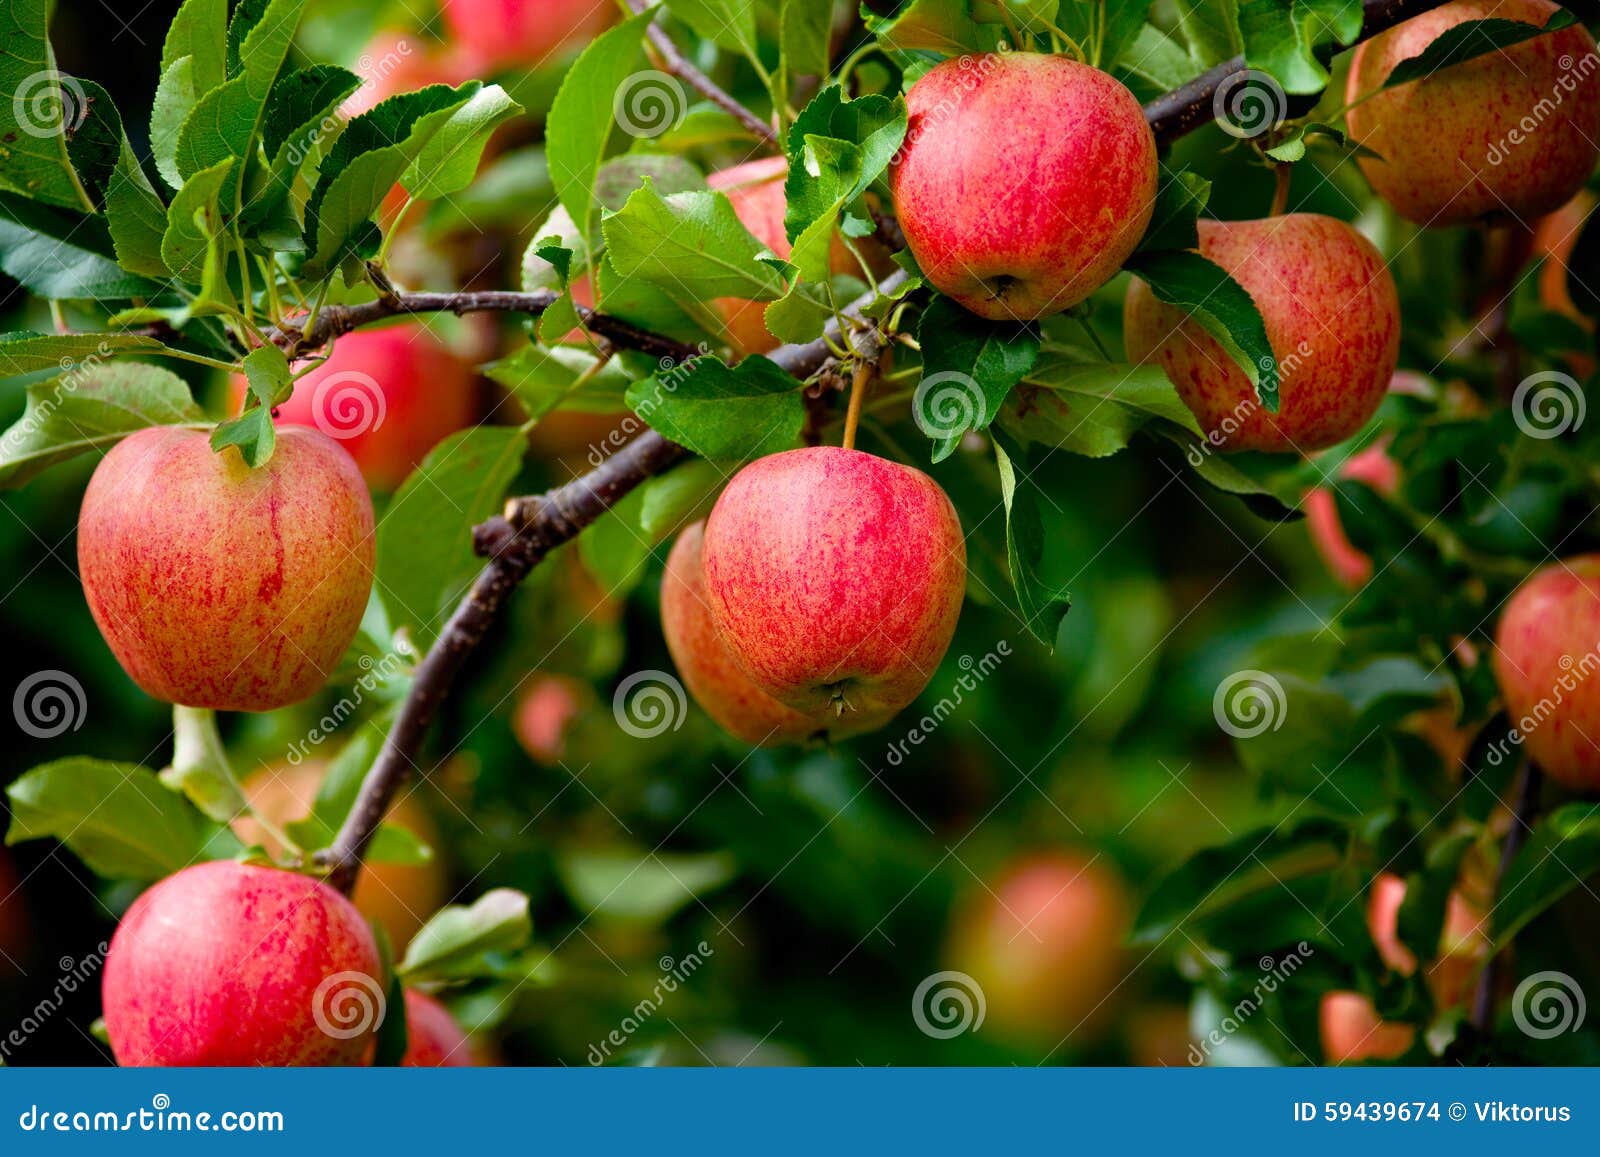 organic red ripe apples on the orchard tree with green leaves